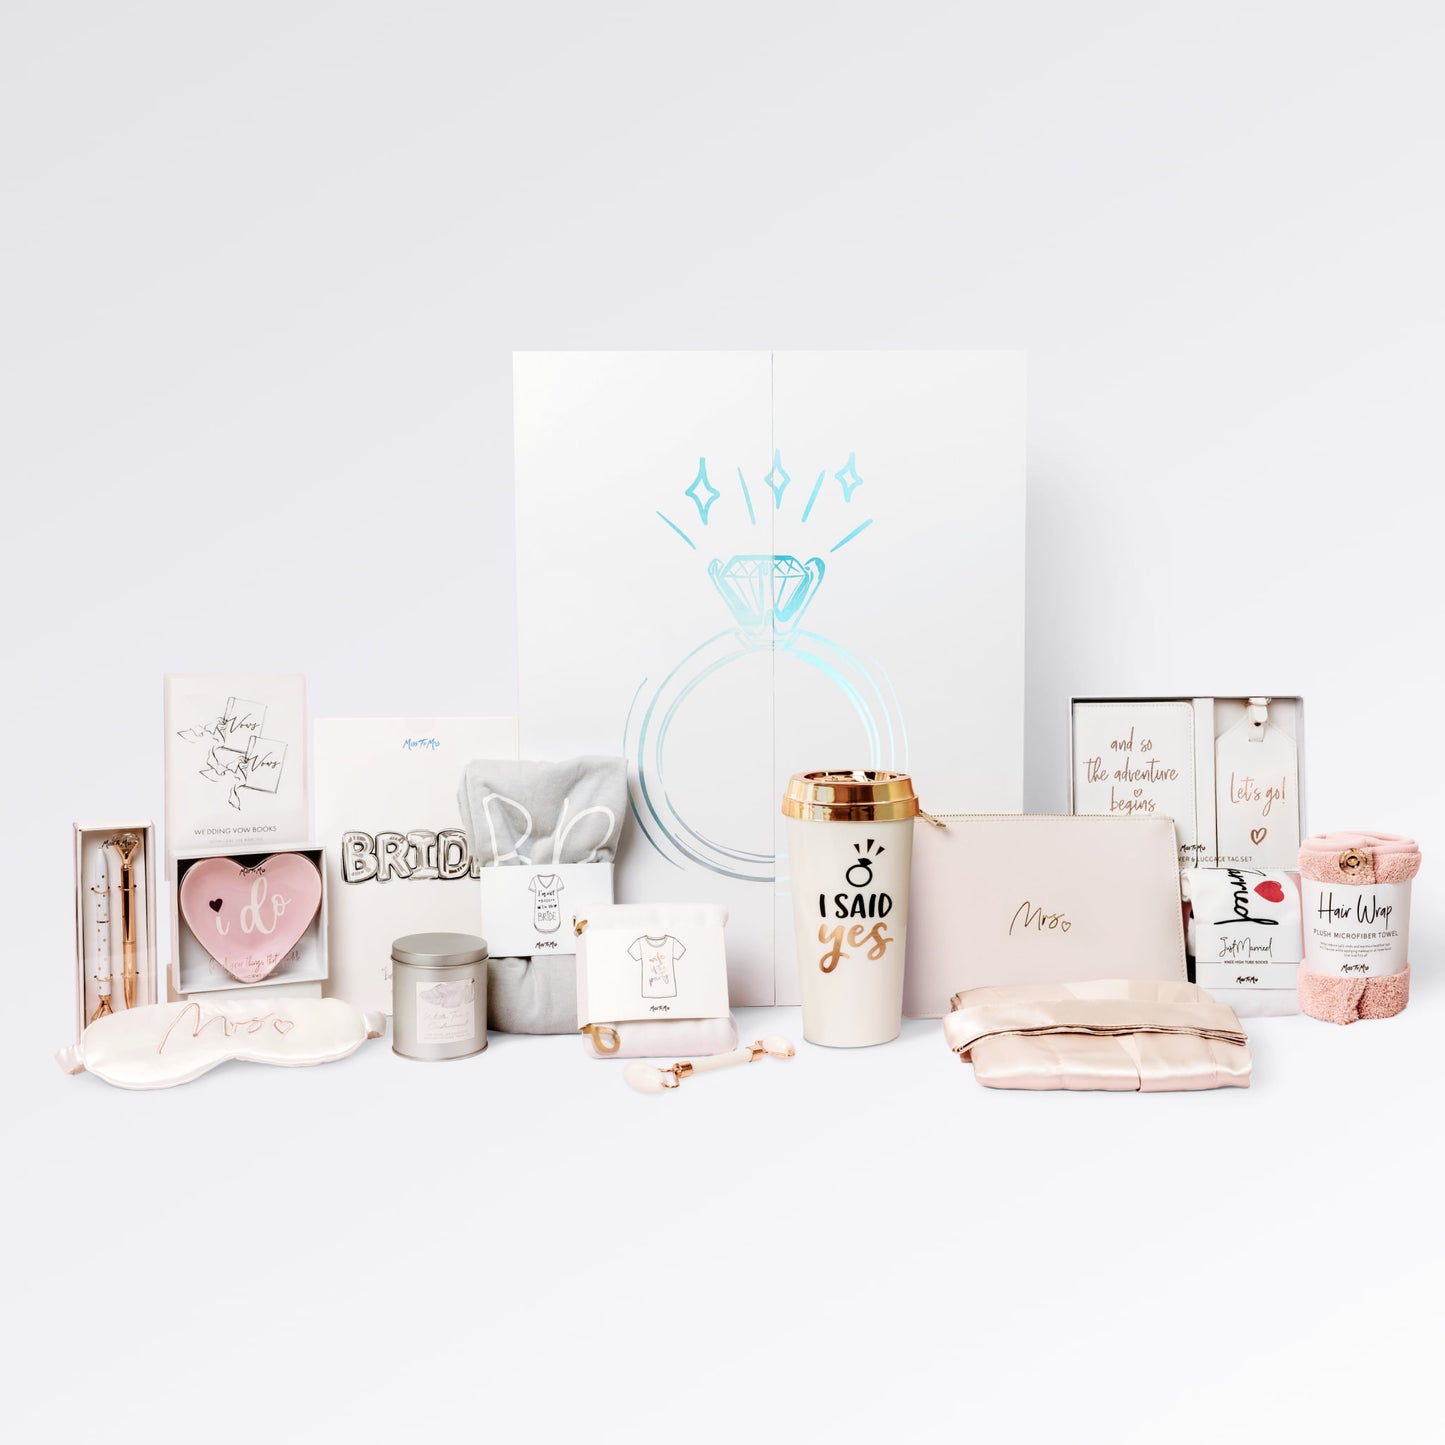 Ultimate Bride Box with 15 full-size products to celebrate the engagement journey and help plan for the big day. 